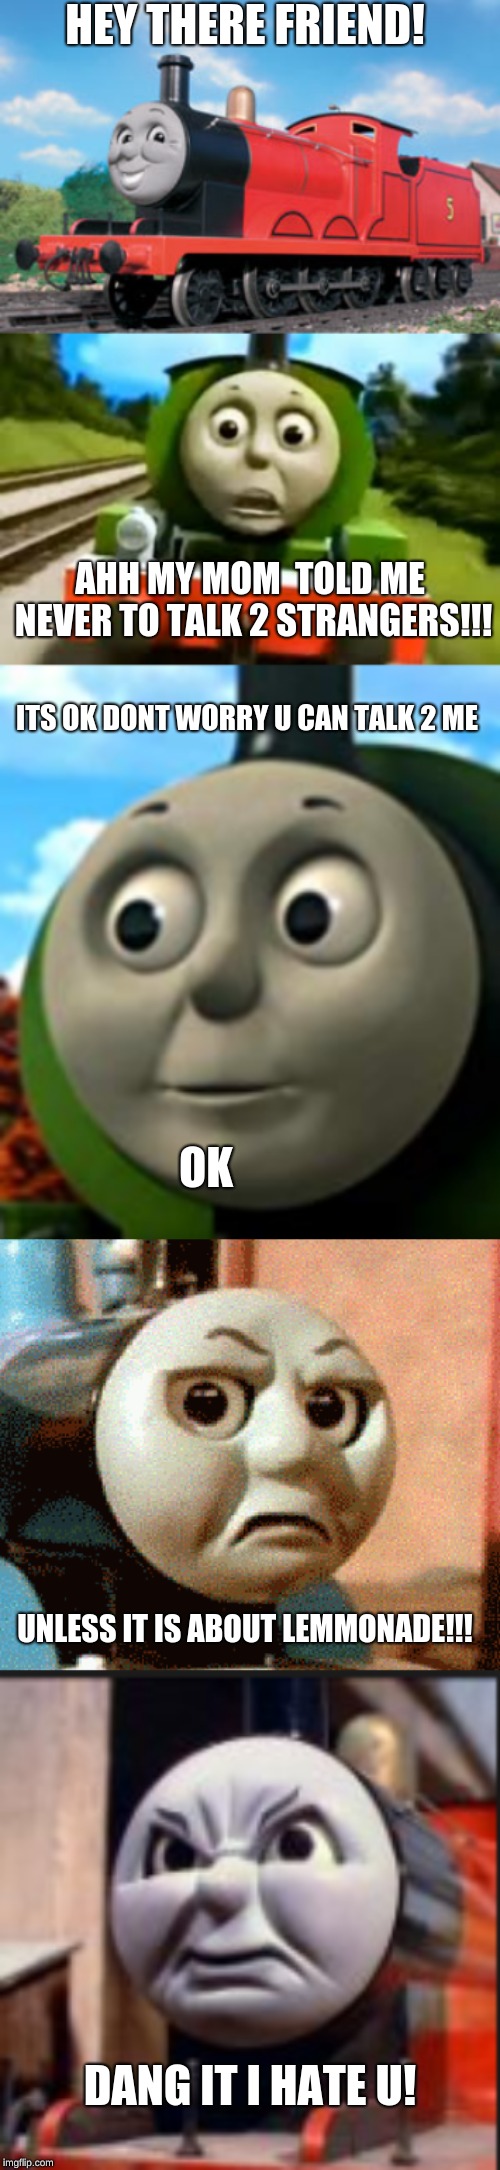 dont tALK TO STRANGERS! | HEY THERE FRIEND! AHH MY MOM  TOLD ME NEVER TO TALK 2 STRANGERS!!! ITS OK DONT WORRY U CAN TALK 2 ME; OK; UNLESS IT IS ABOUT LEMMONADE!!! DANG IT I HATE U! | image tagged in lemmonade,thomas the tank engine,dumb stuff | made w/ Imgflip meme maker